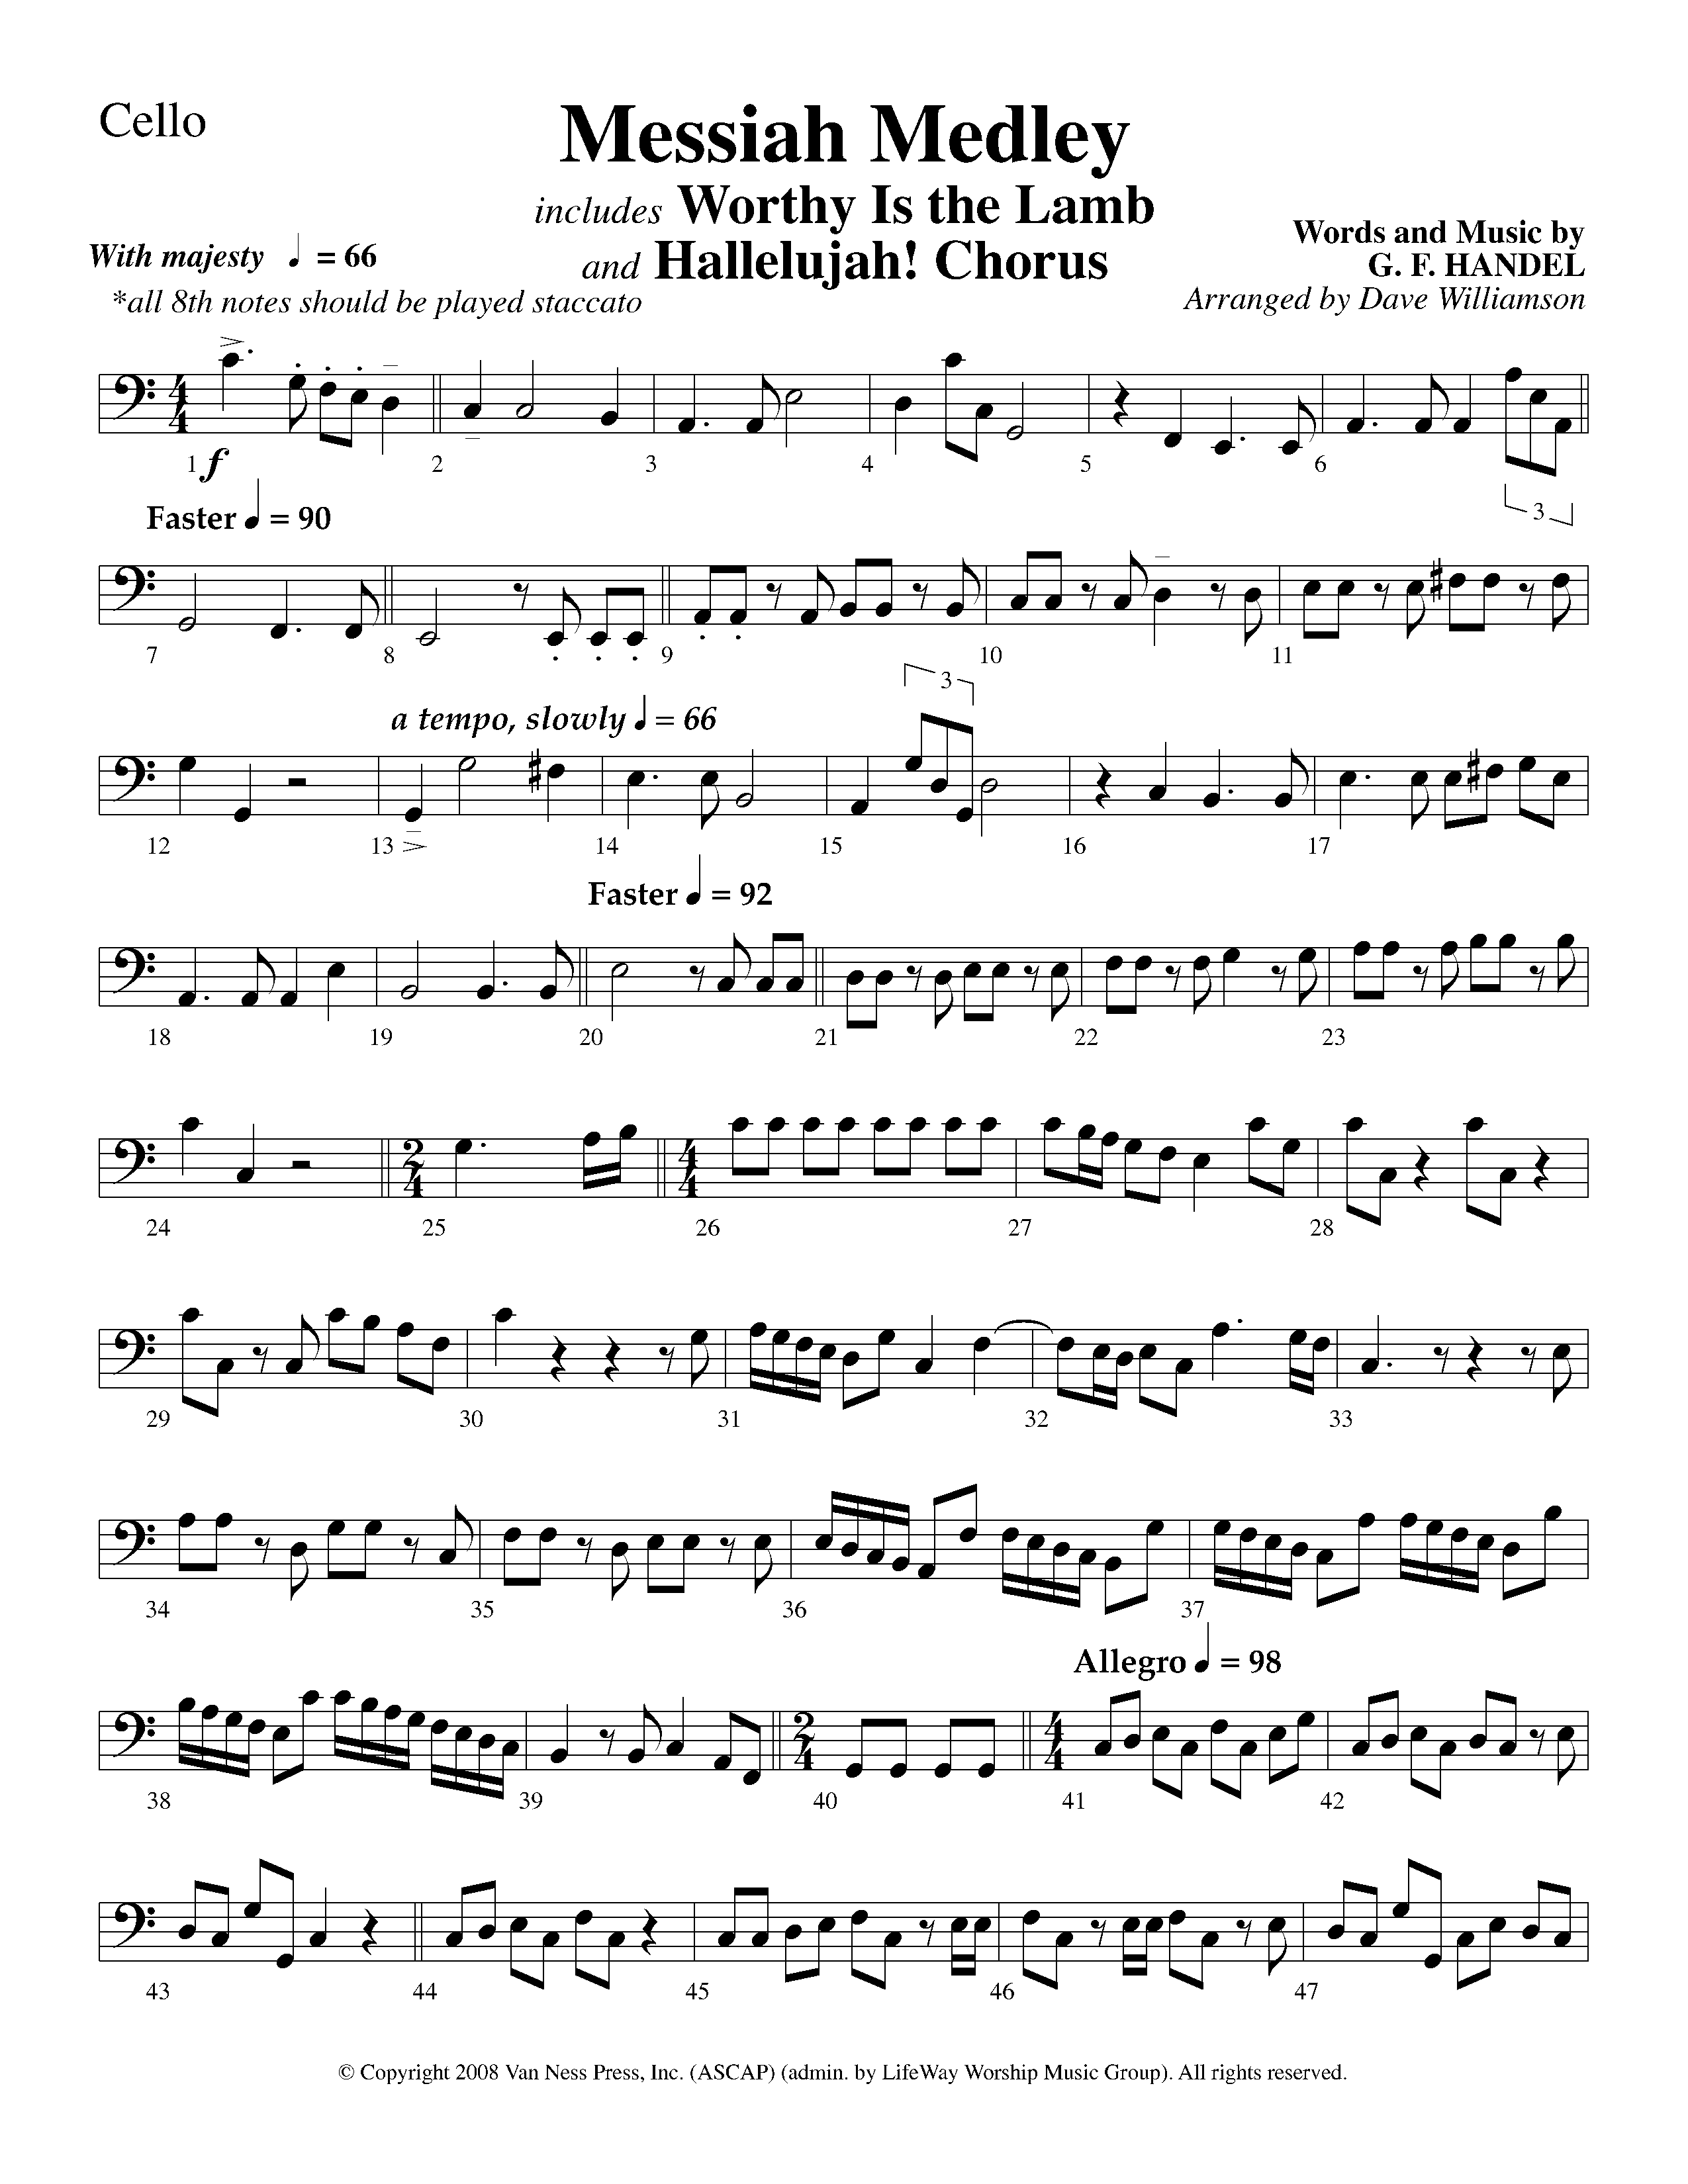 Messiah Medley (with Worthy Is The Lamb, Hallelujah Chorus) (Choral Anthem SATB) Cello (Lifeway Choral / Arr. Dave Williamson)